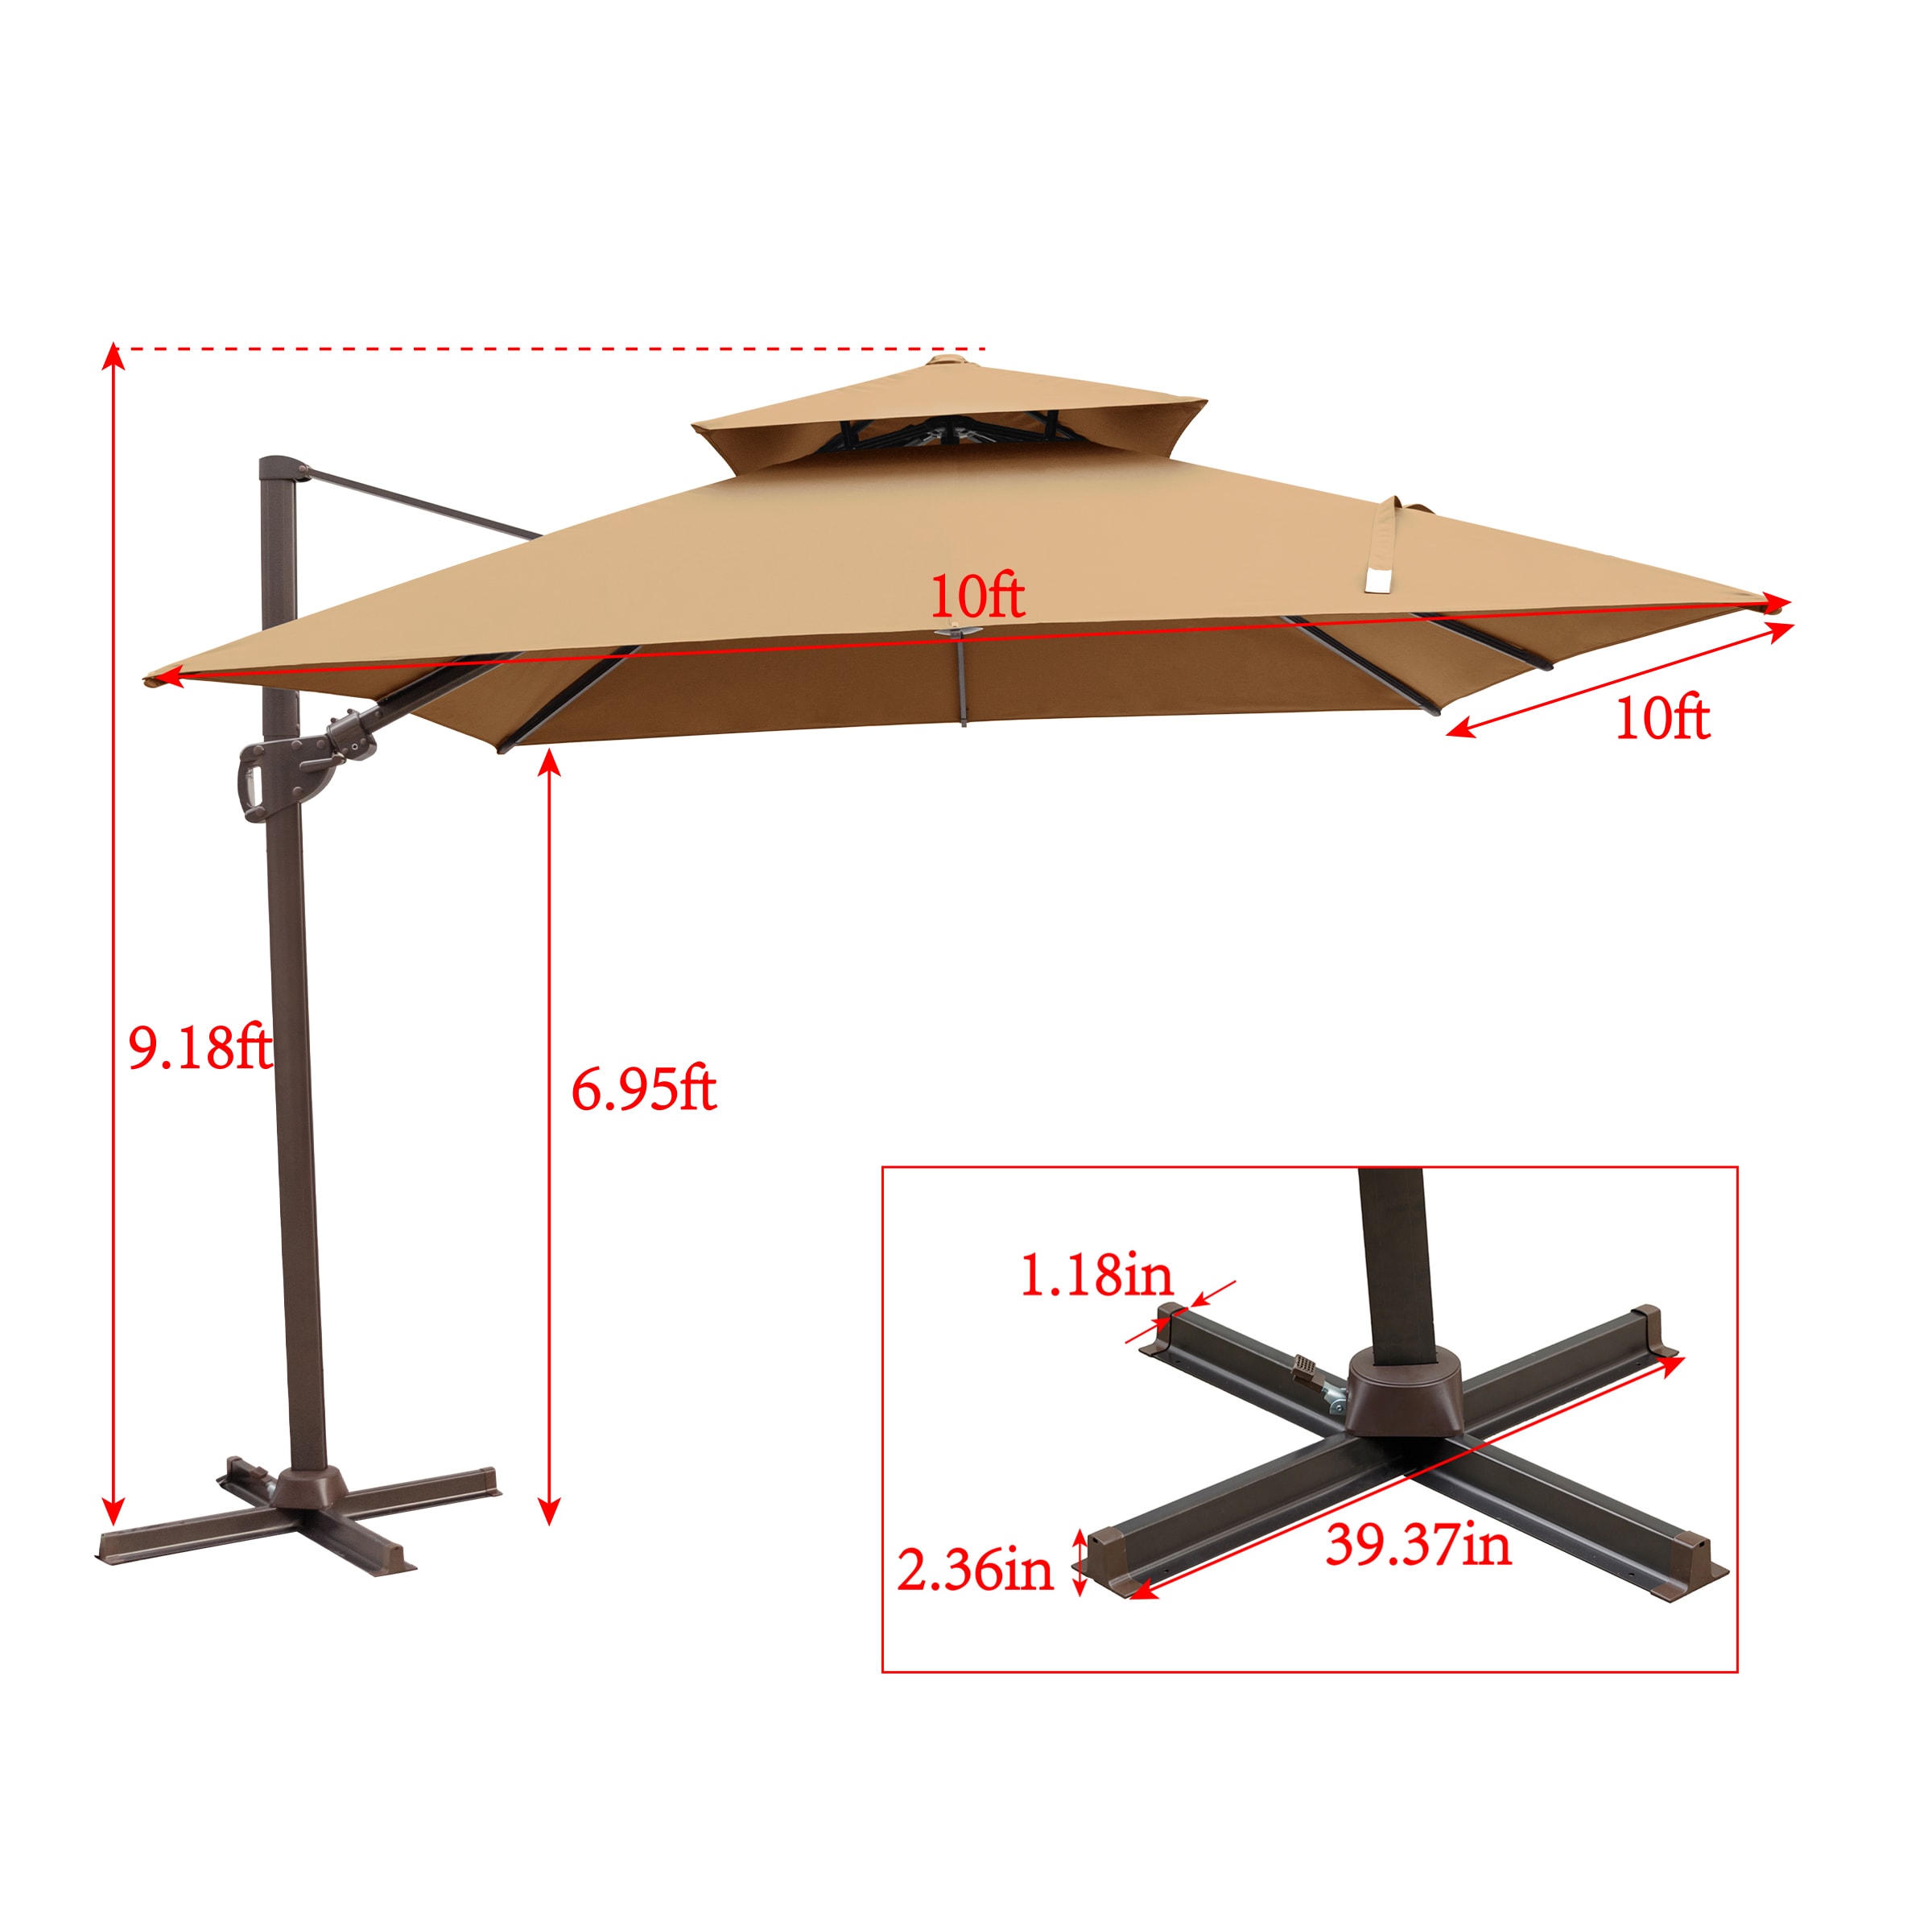 Crestlive Products Universal Patio Umbrella Replacement Canopy for 10ft 8 Ribs Offset Umbrellas Brown